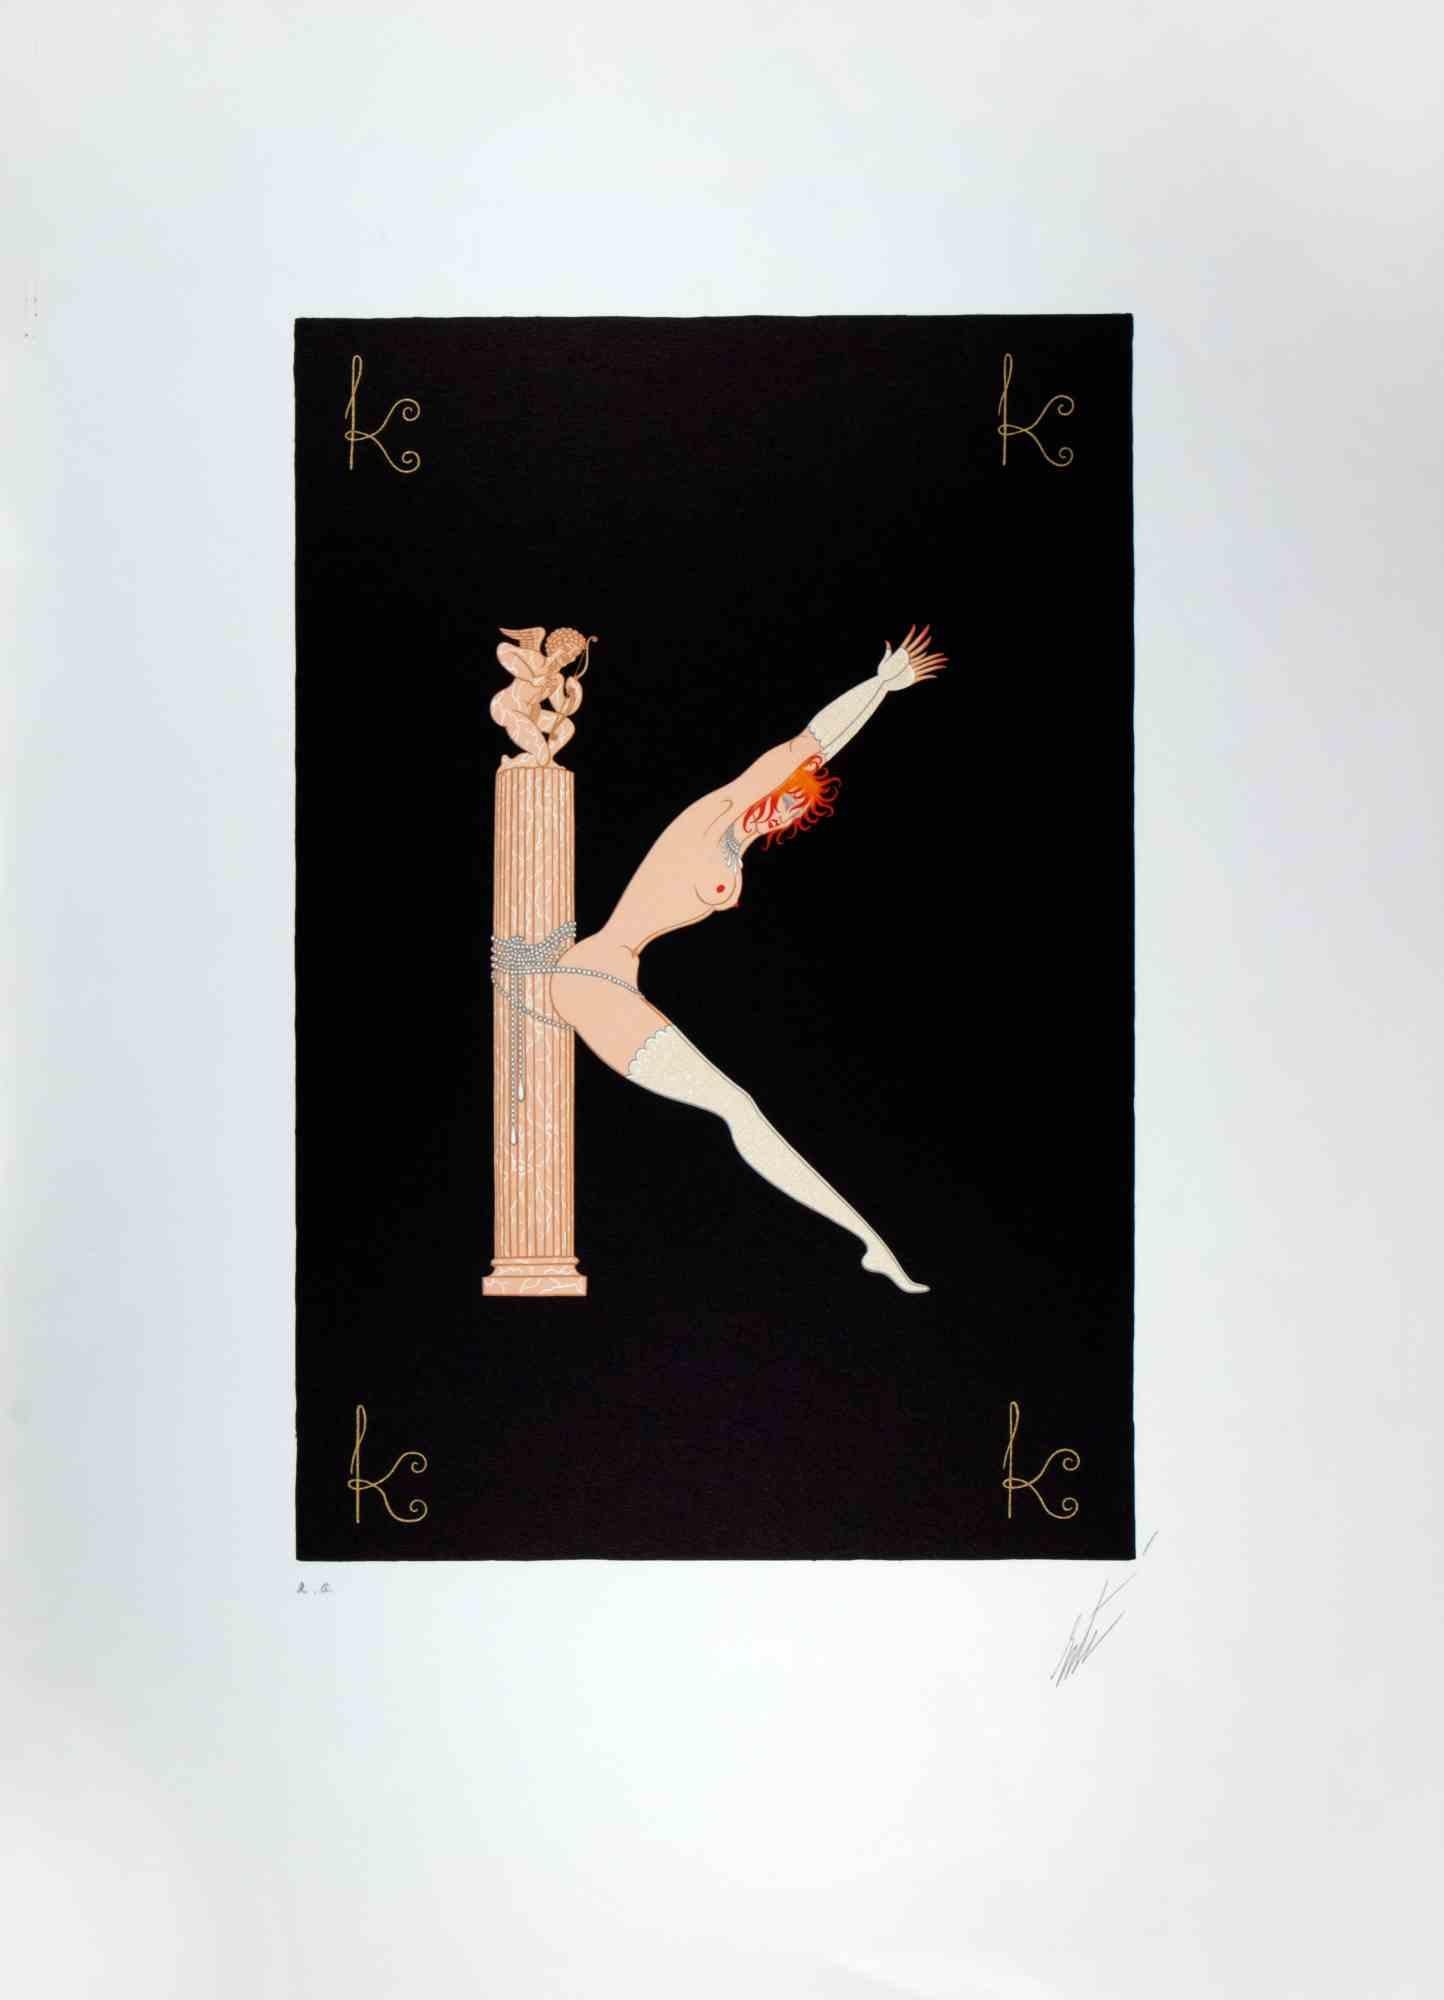 Letter K - from the suite Letters of the Alphabet is a contemporary artwork realized by Erté (Romain de Tirtoff).

Lithograph and Screen Print.

The artwork is from the suite "Letters of the Alphabet", 1976.

Hand signed on the lower margin. Artist